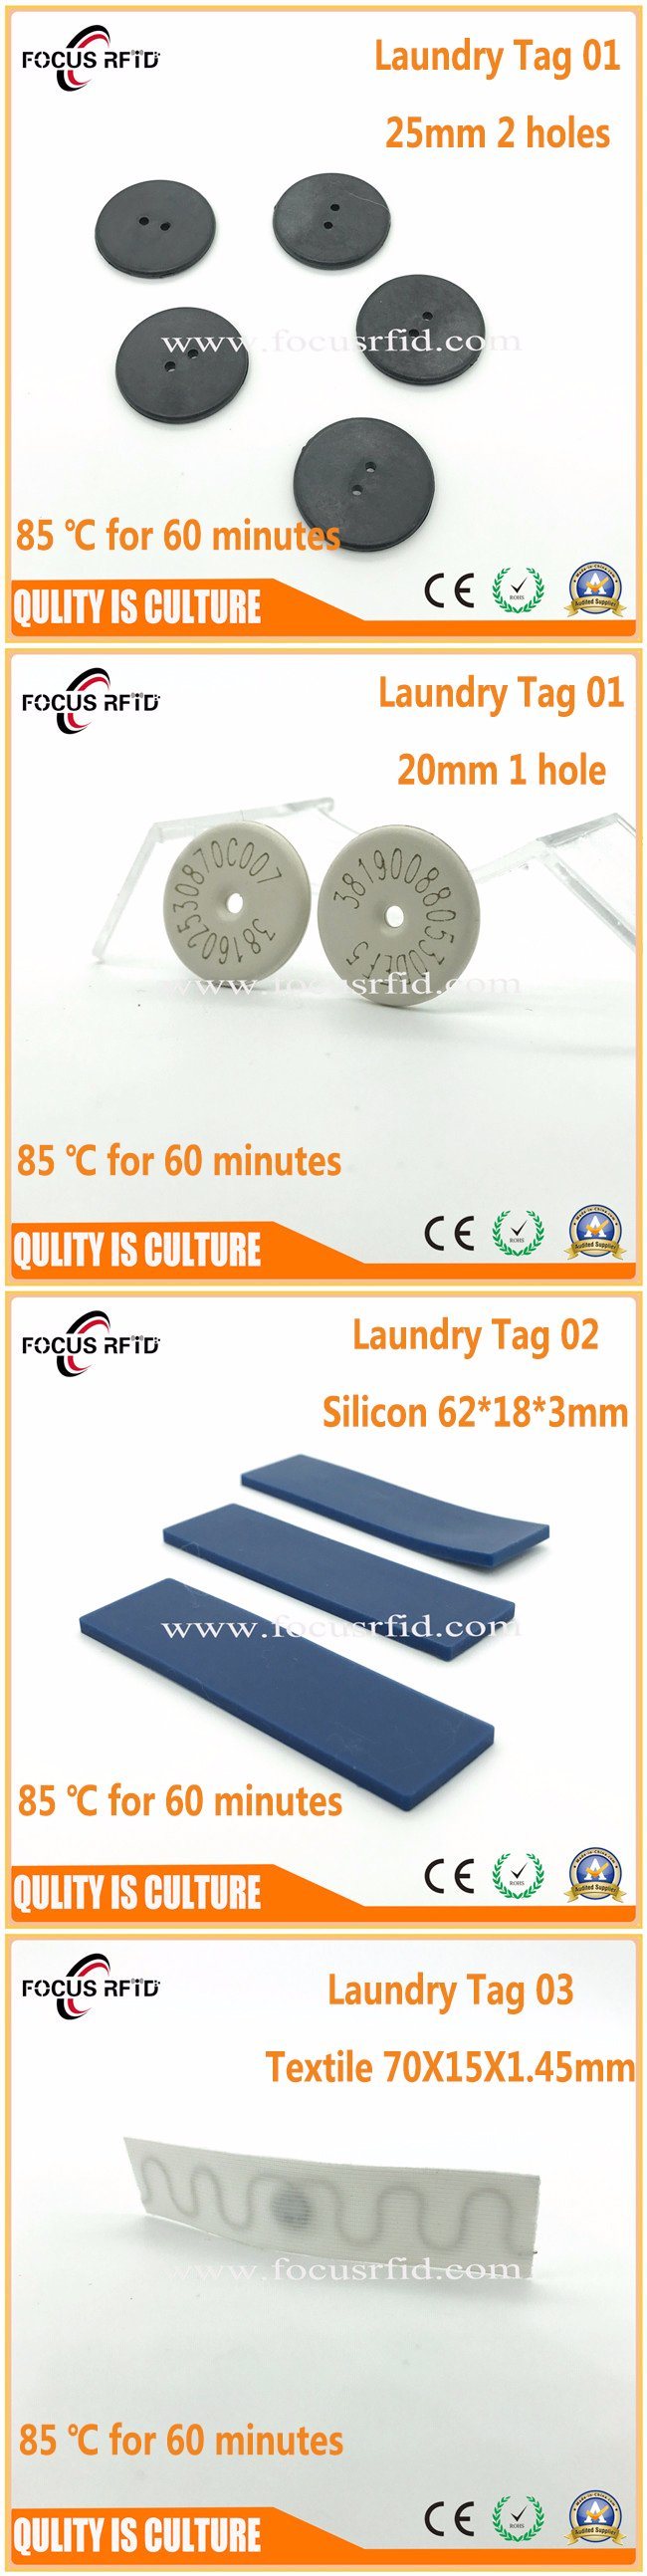 High Temperature Resistant RFID Laundry Tag for Hotel Towel